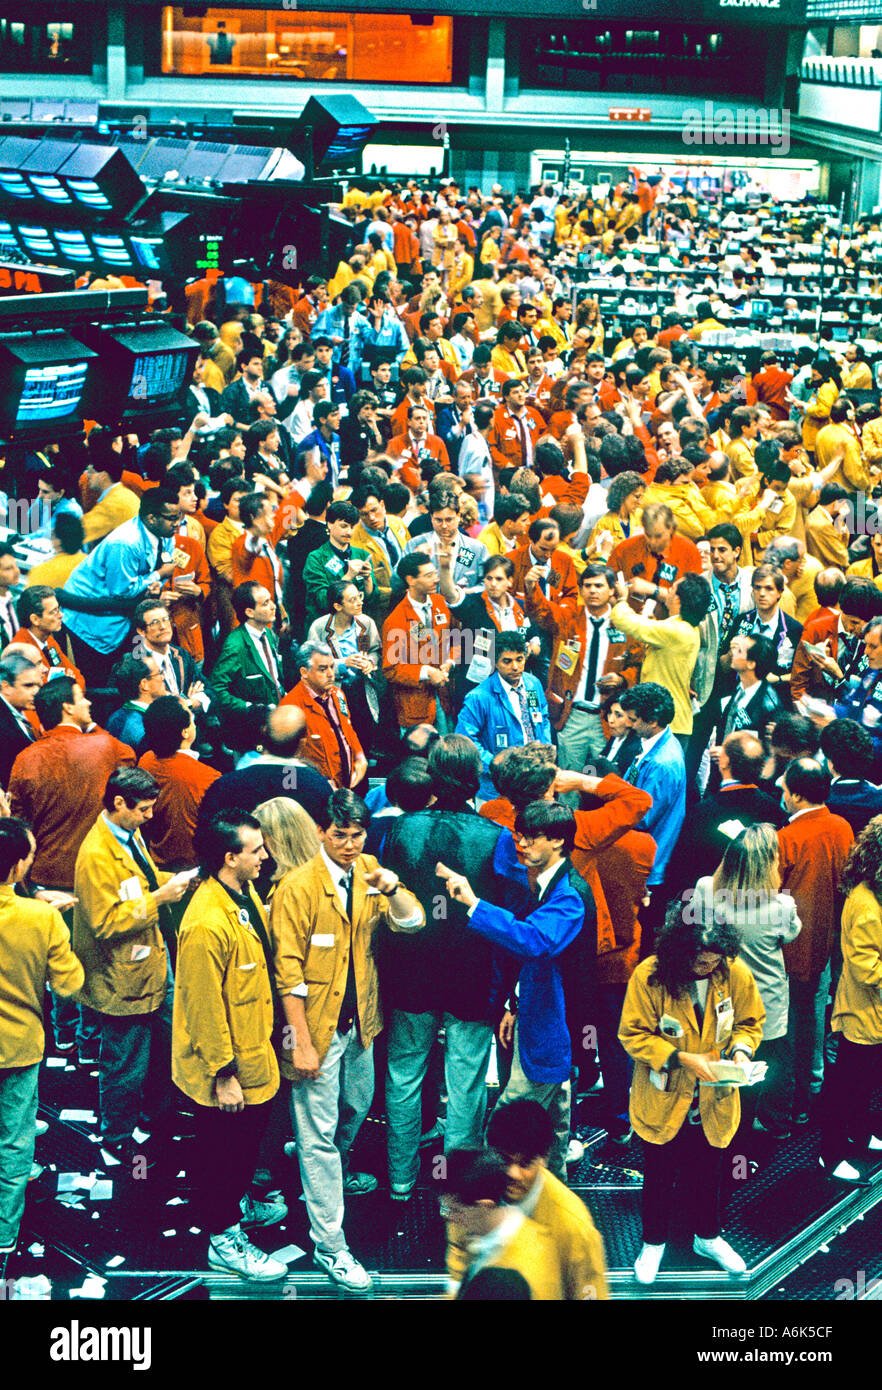 Chicago IL USA 'Chicago Options Exchange' Stockbrokers Working on Trading on Floor 'CME Group' Business Stock Exchange crowd above Stock Photo